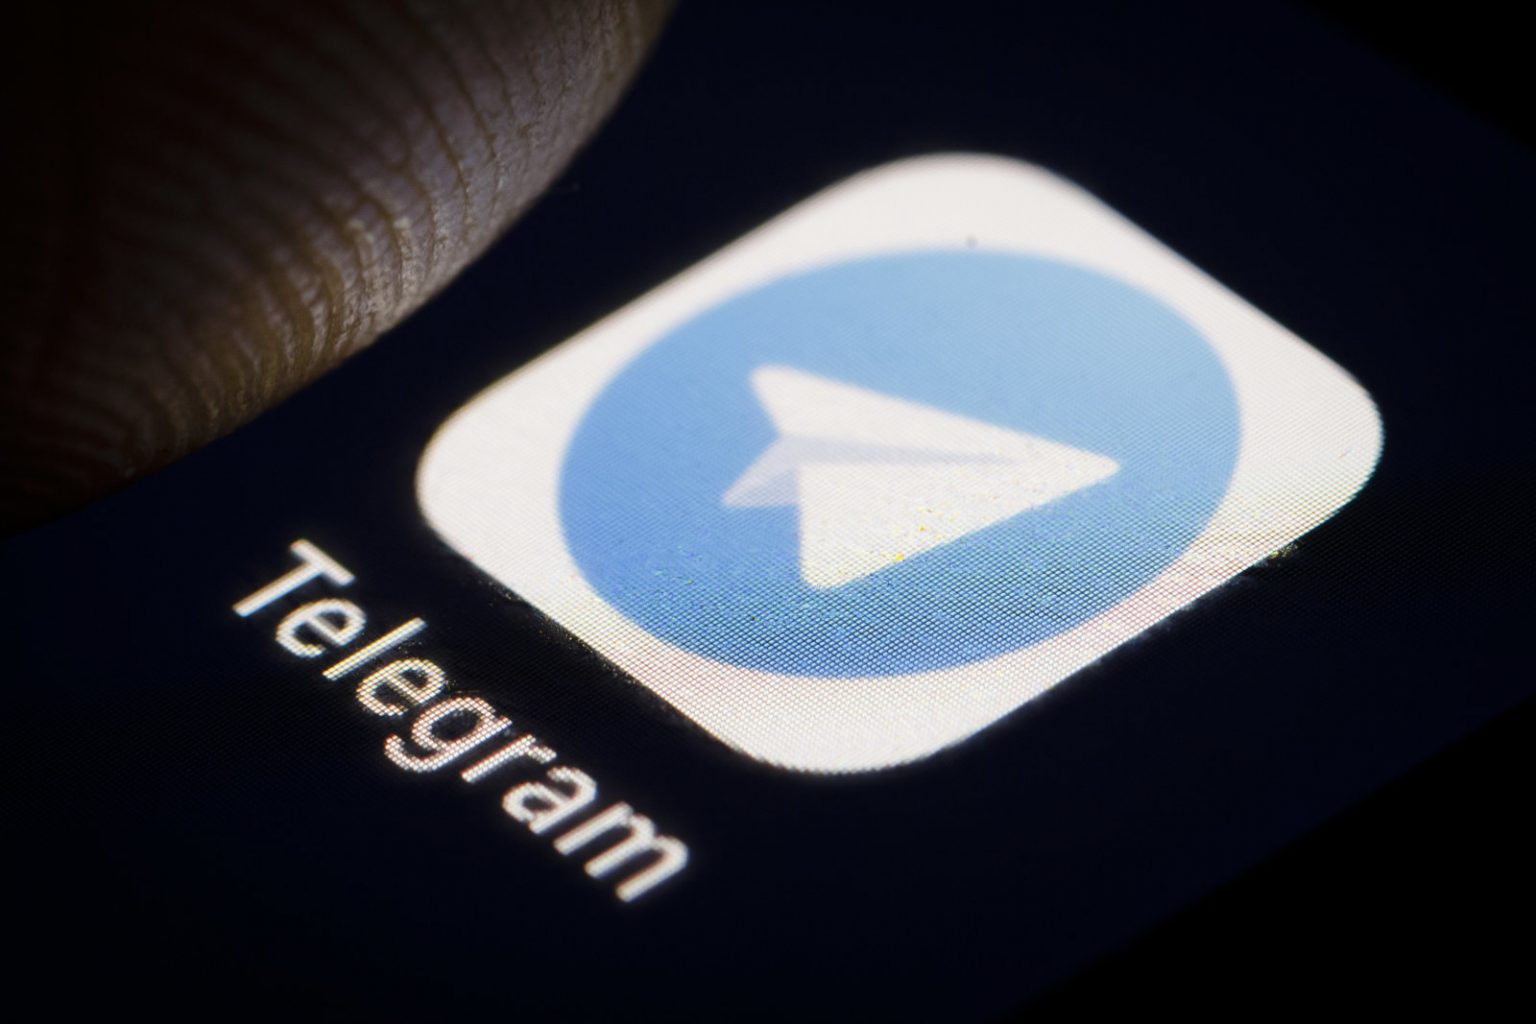 Telegram Desktop app on Windows gets updated with many new features ...